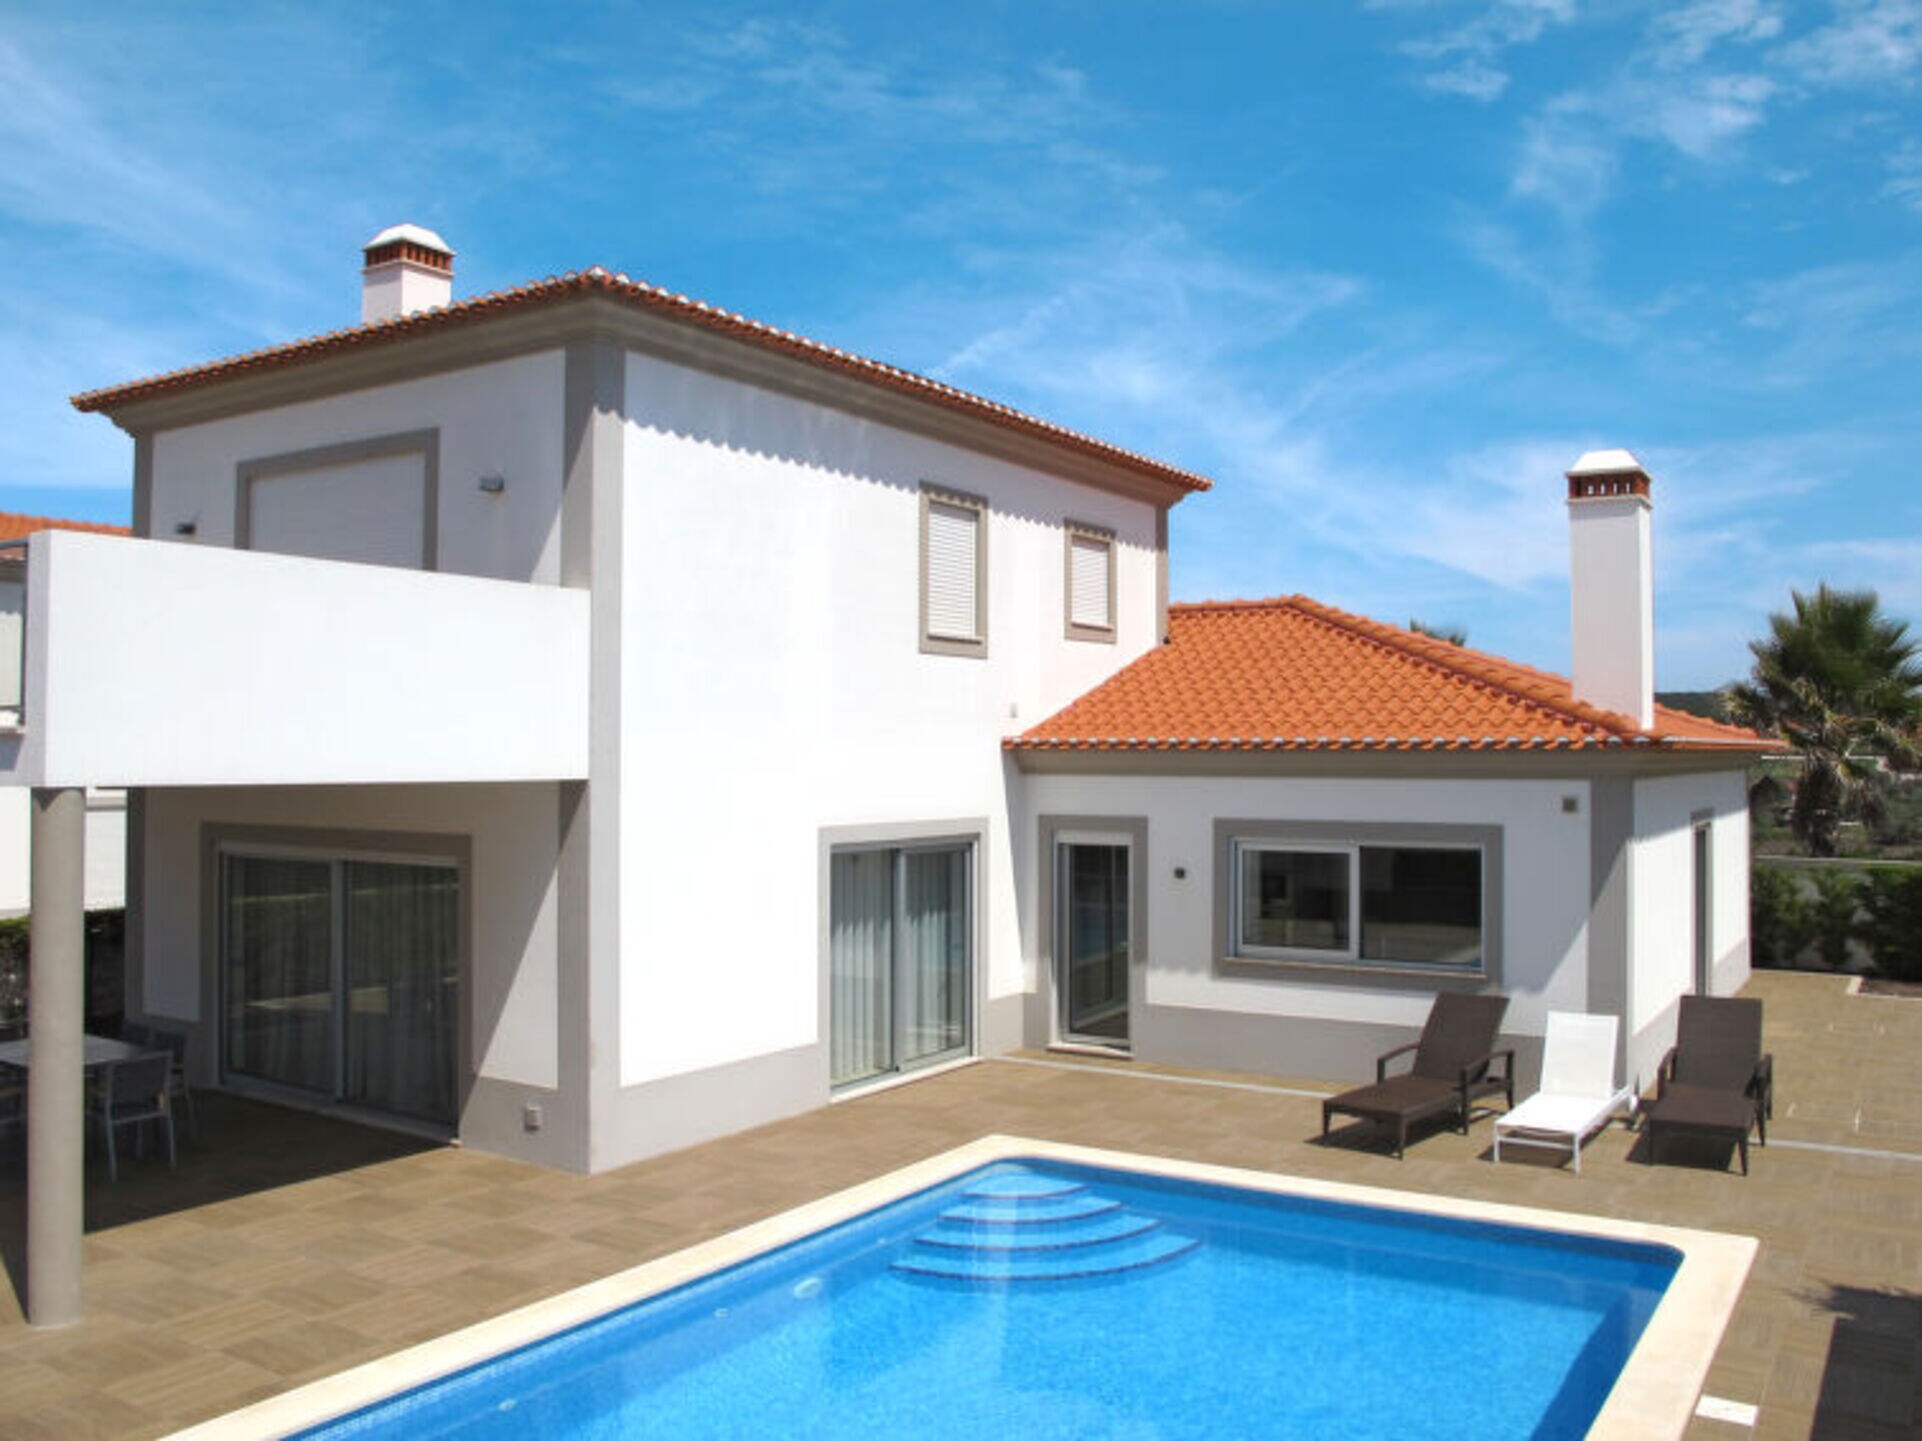 Property Image 2 - Property Manager Villa with First Class Amenities, Leiria Villa 1002